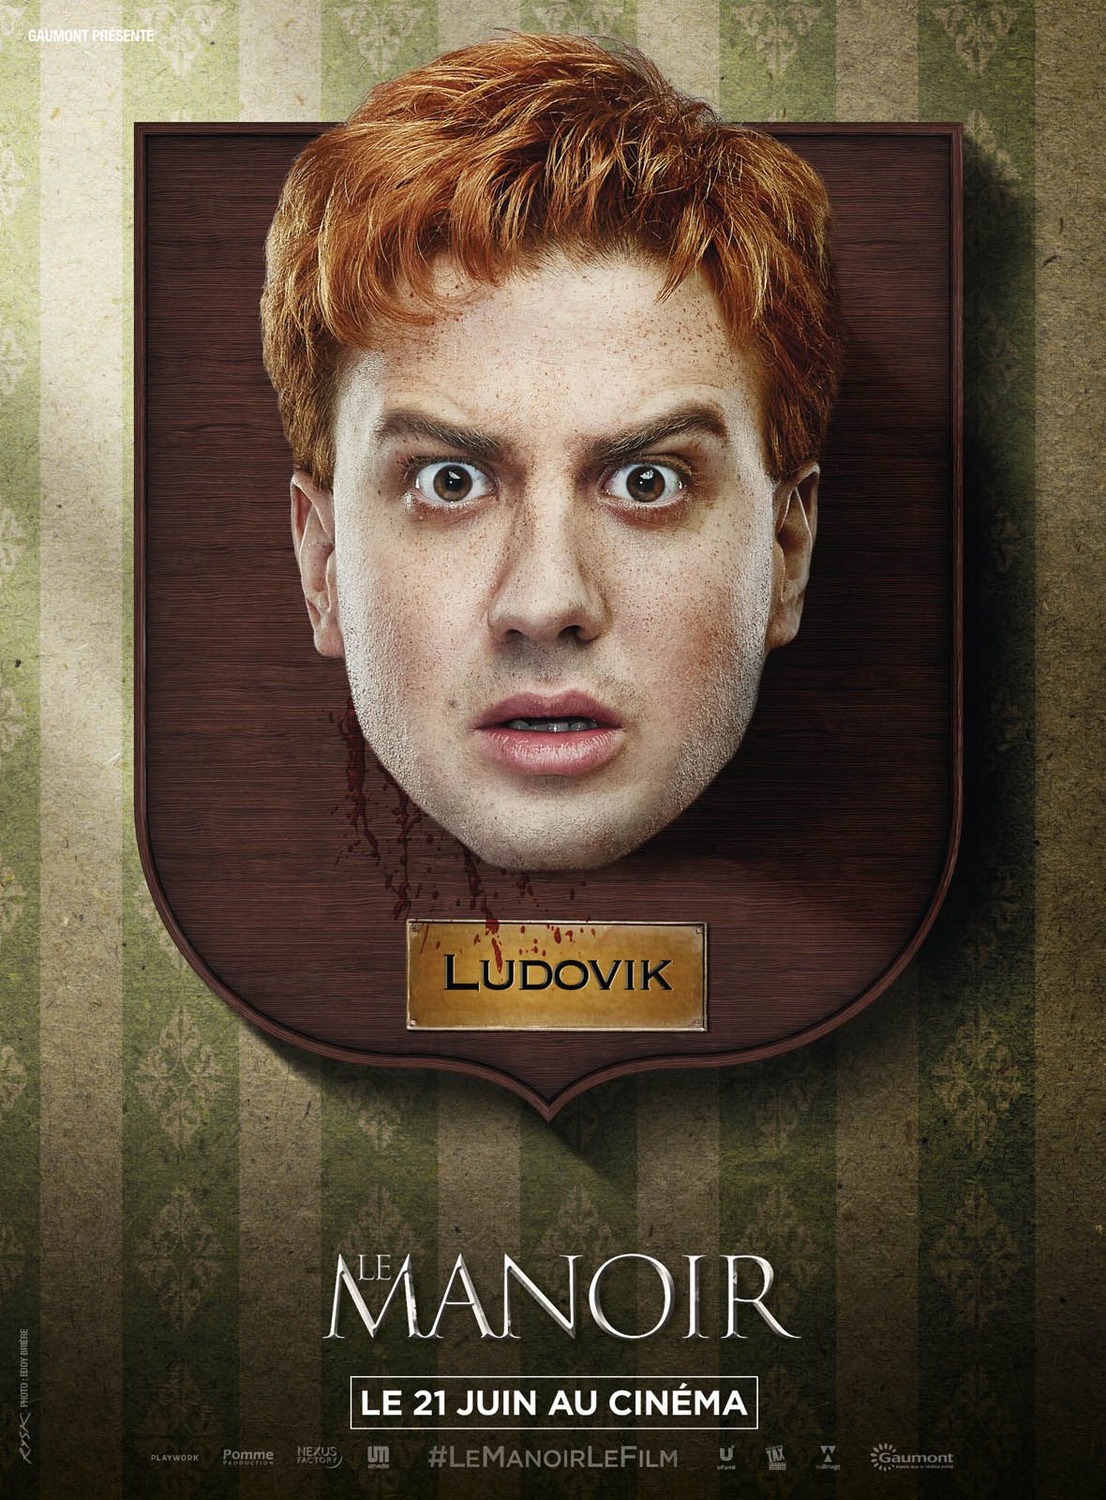 Extra Large Movie Poster Image for Le manoir (#11 of 11)